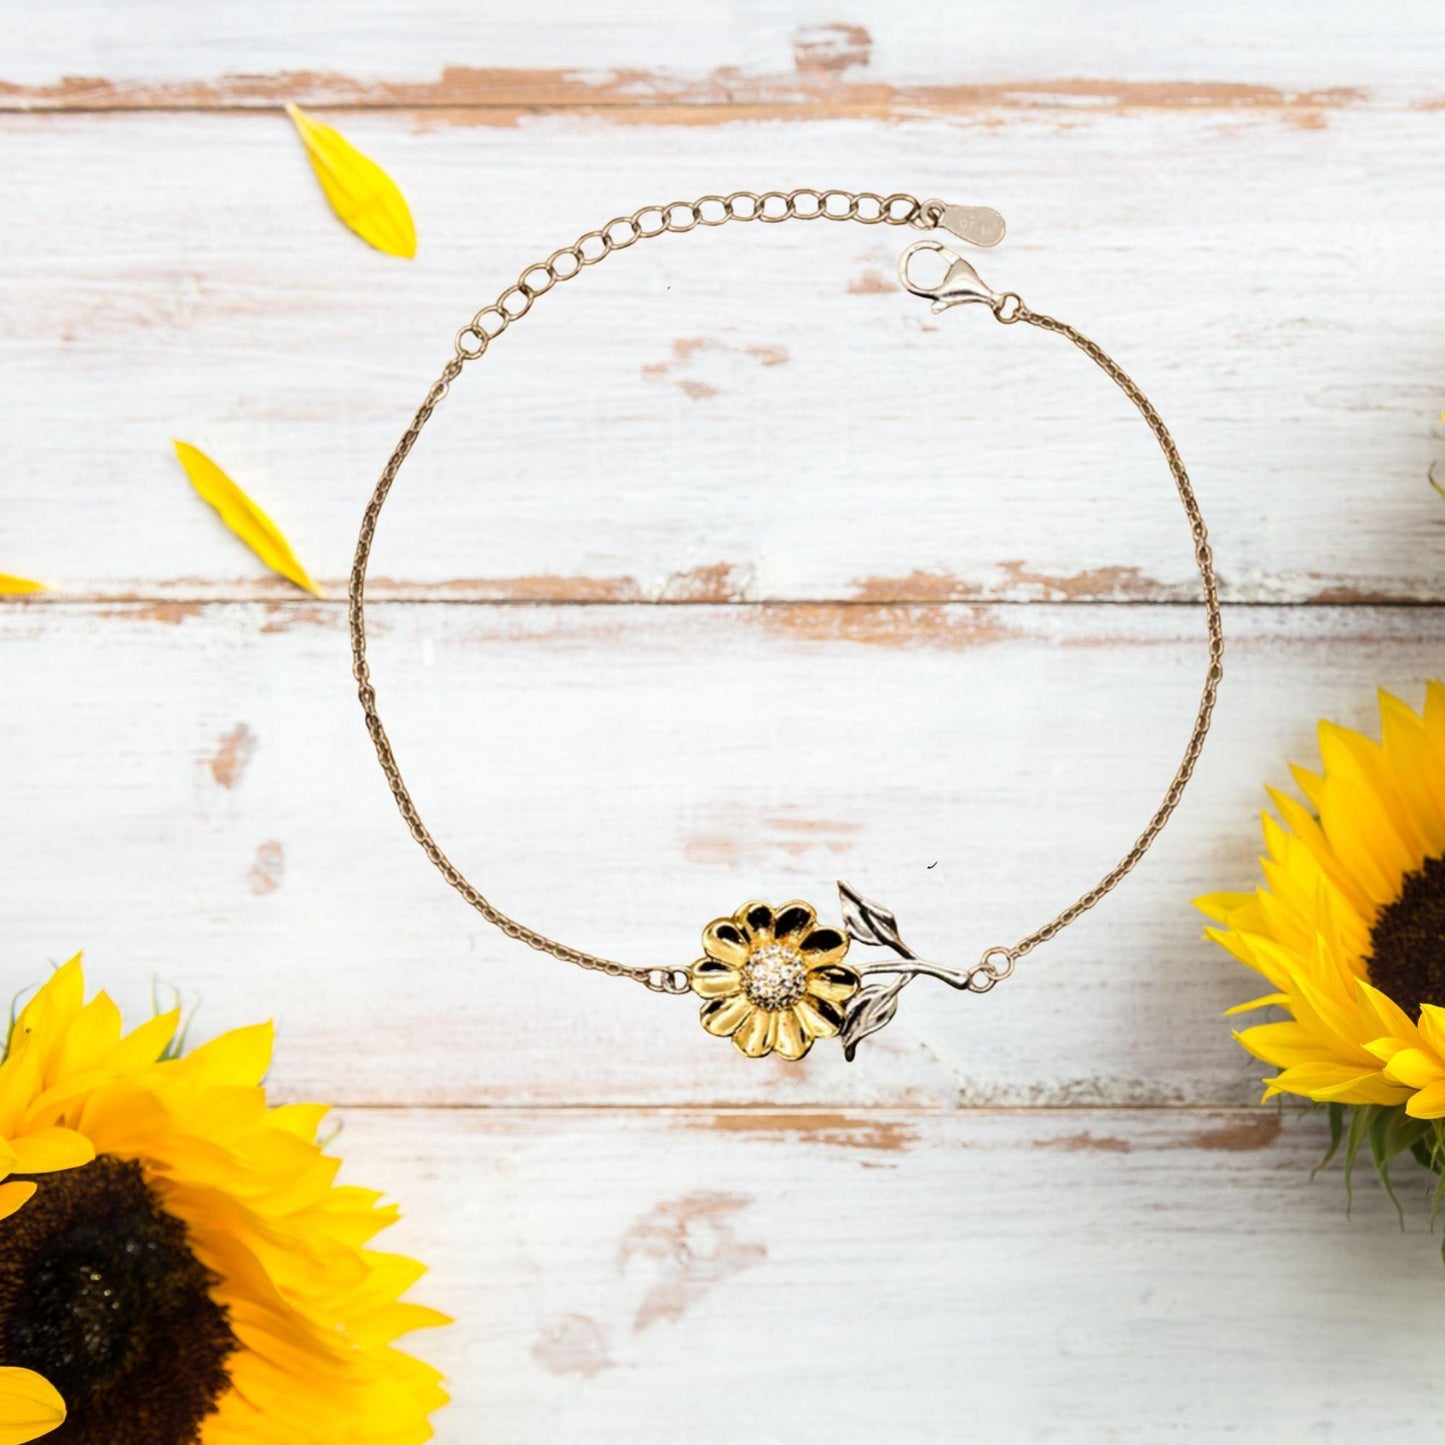 Janitor Sunflower Bracelet - Thanks for being who you are - Birthday Christmas Jewelry Gifts Coworkers Colleague Boss - Mallard Moon Gift Shop